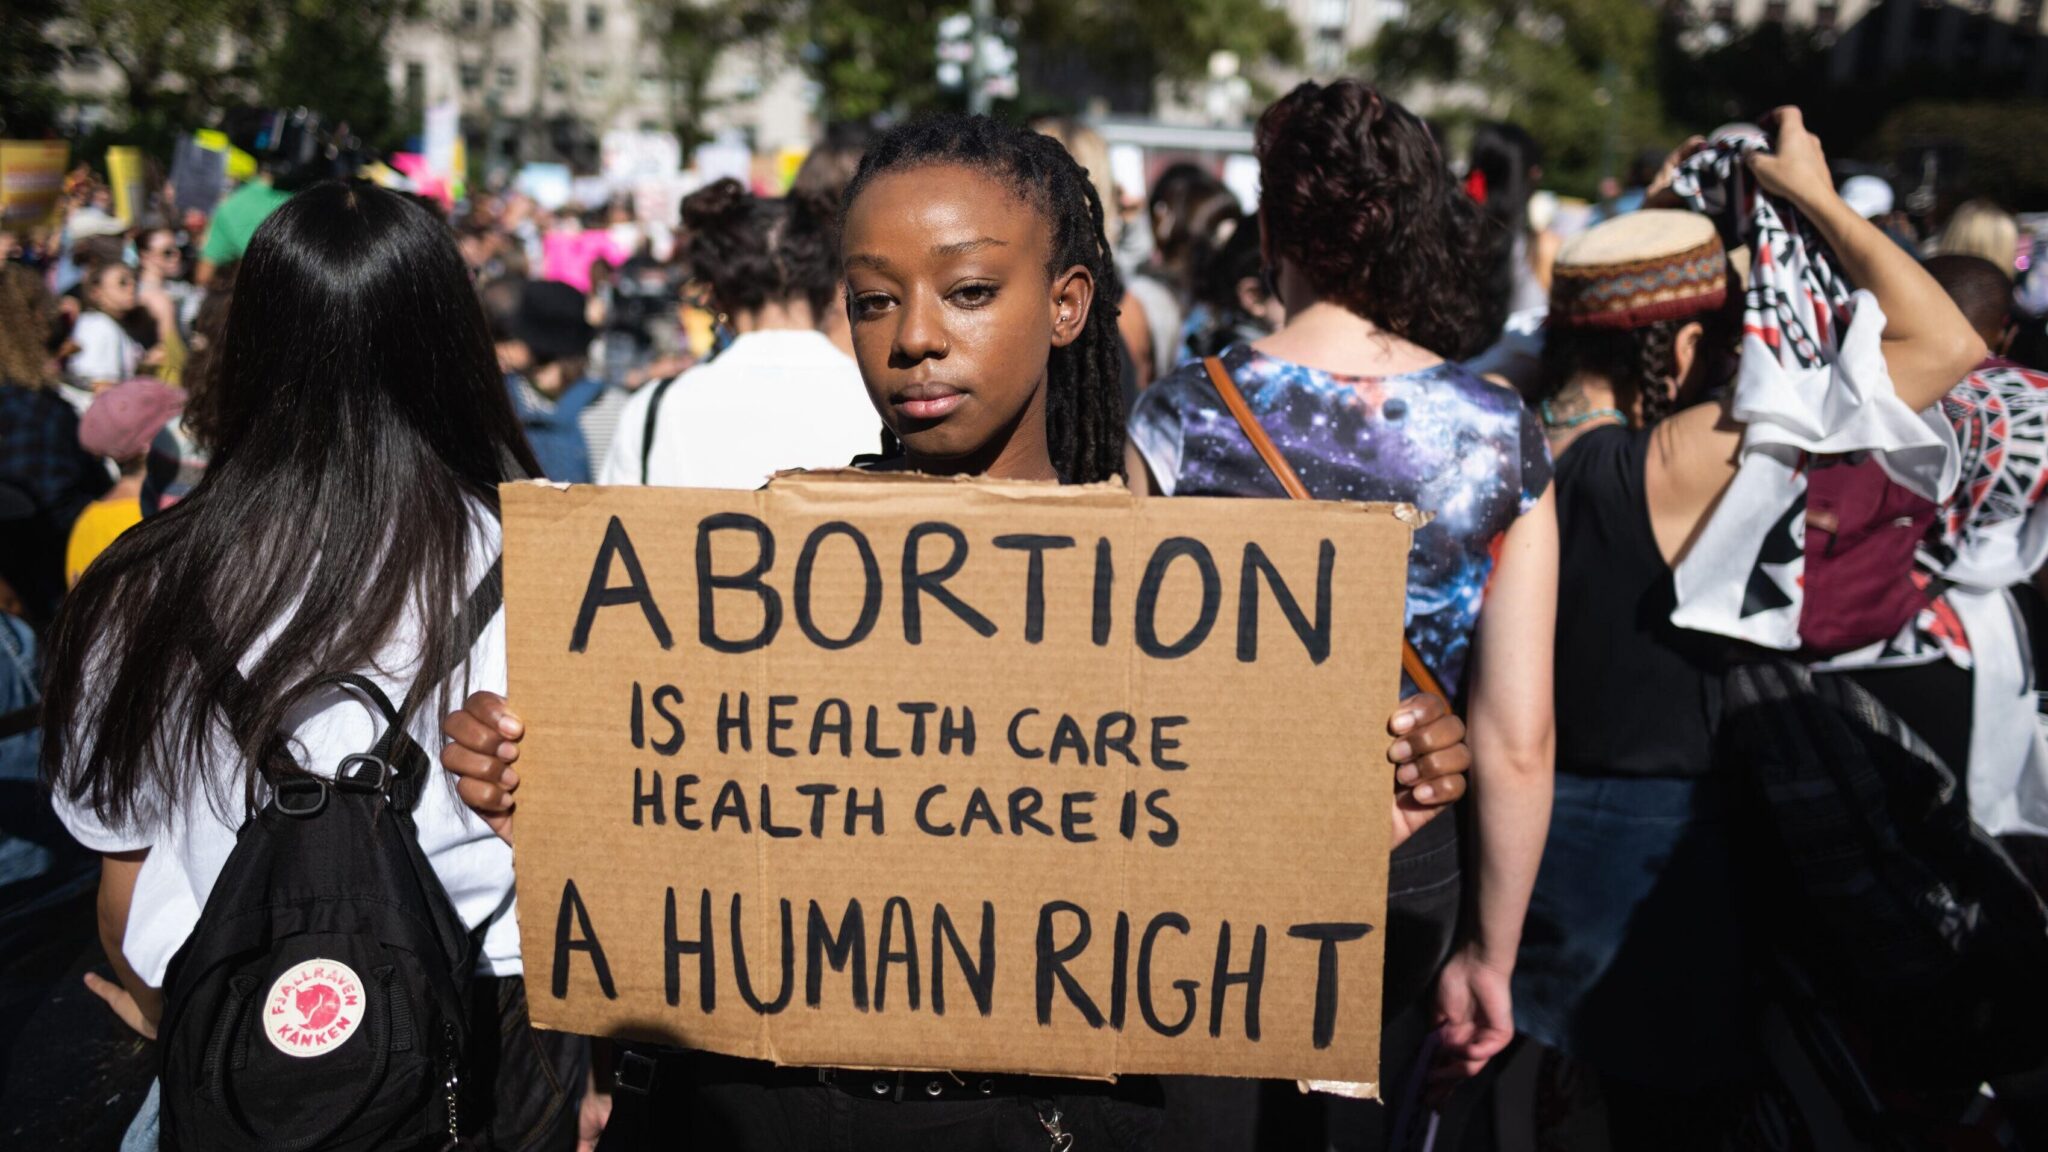 Abortion-human-rights-sign-scaled-aspect-ratio-16-9-scaled-1